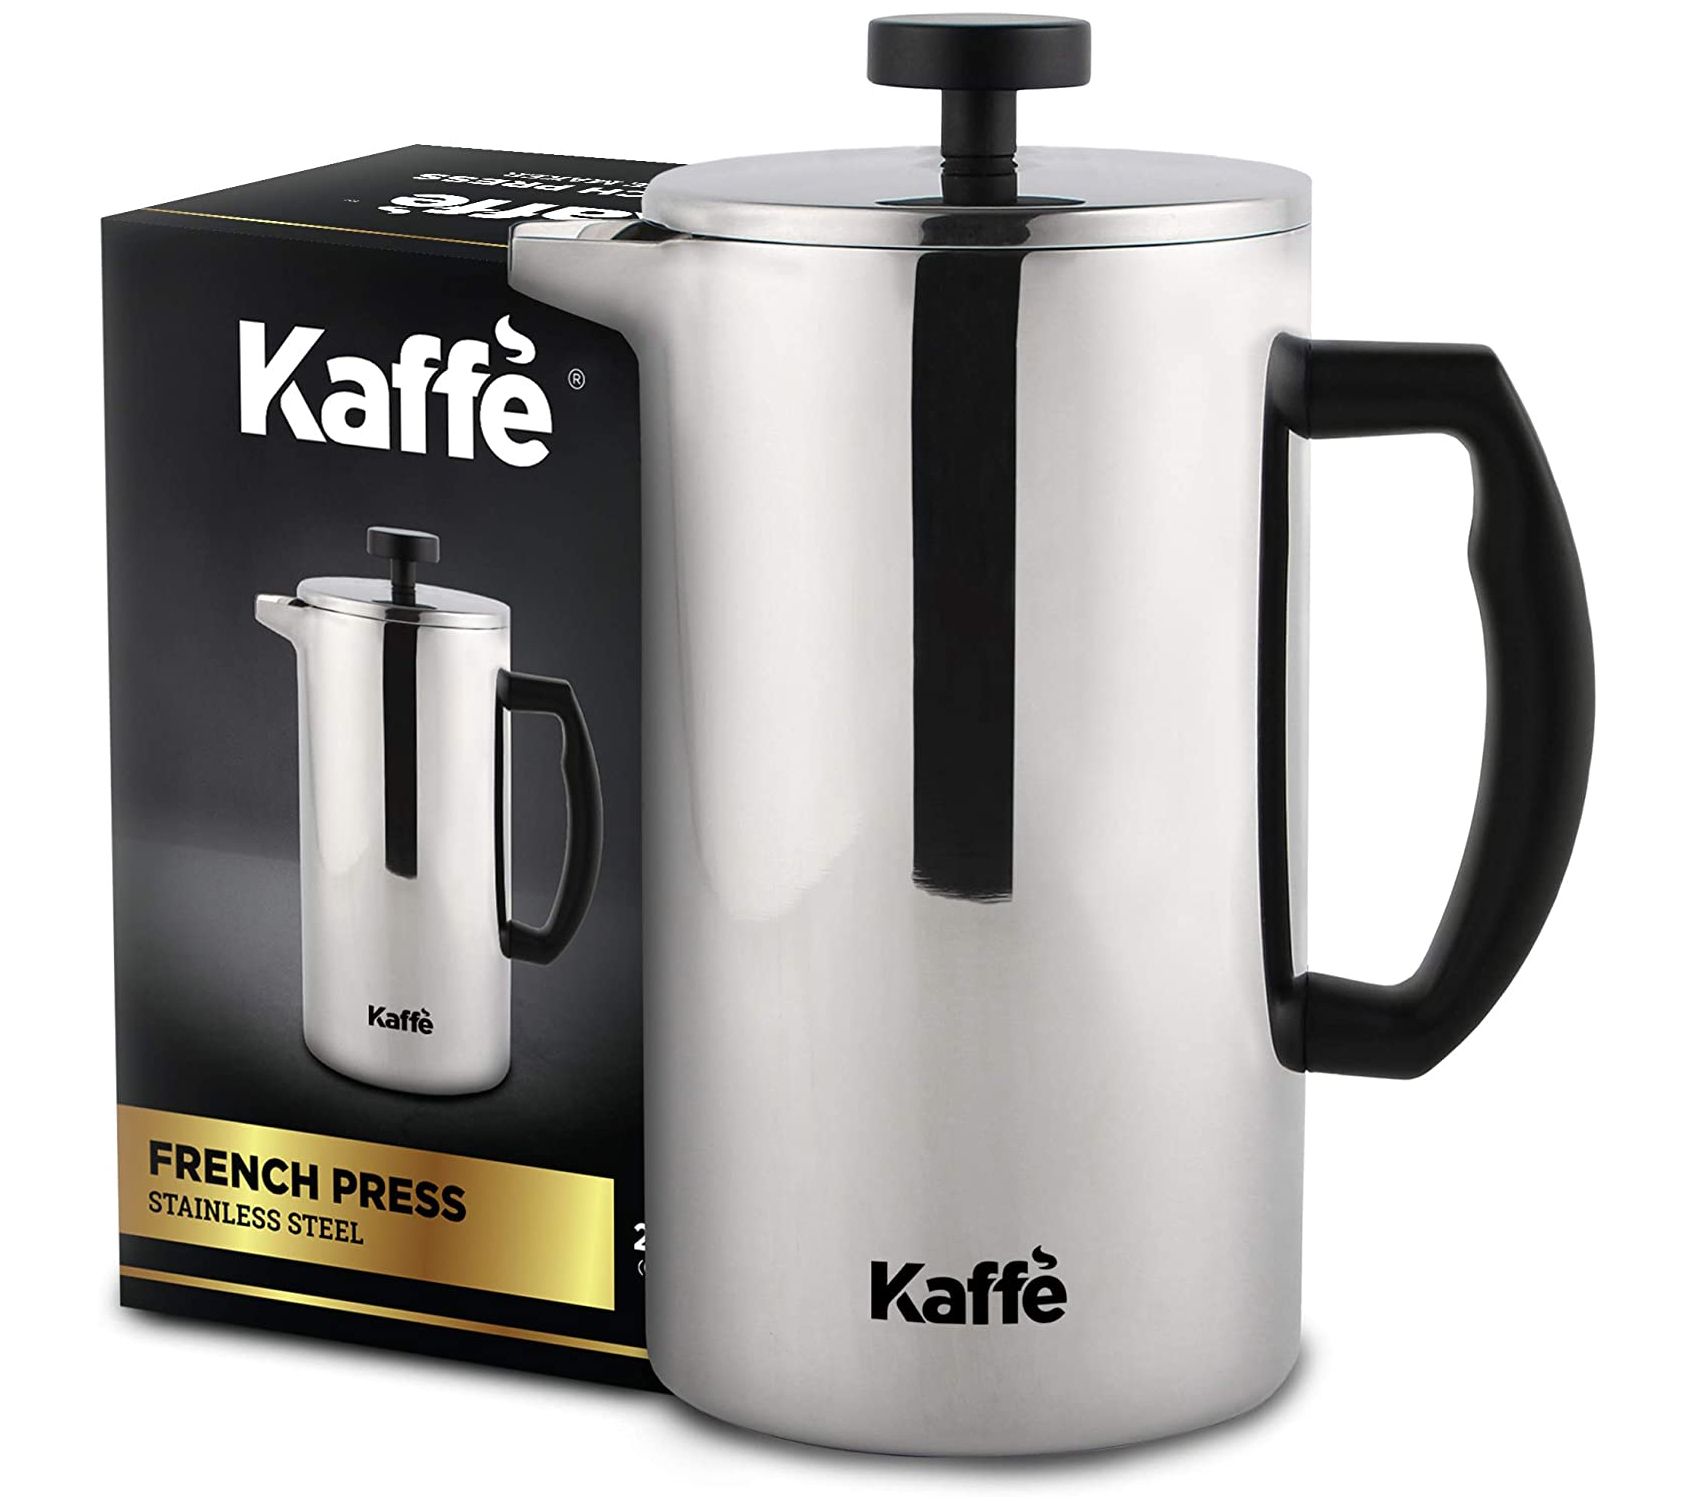 Kaffe Electric Burr Coffee Grinder - Stainless Steel